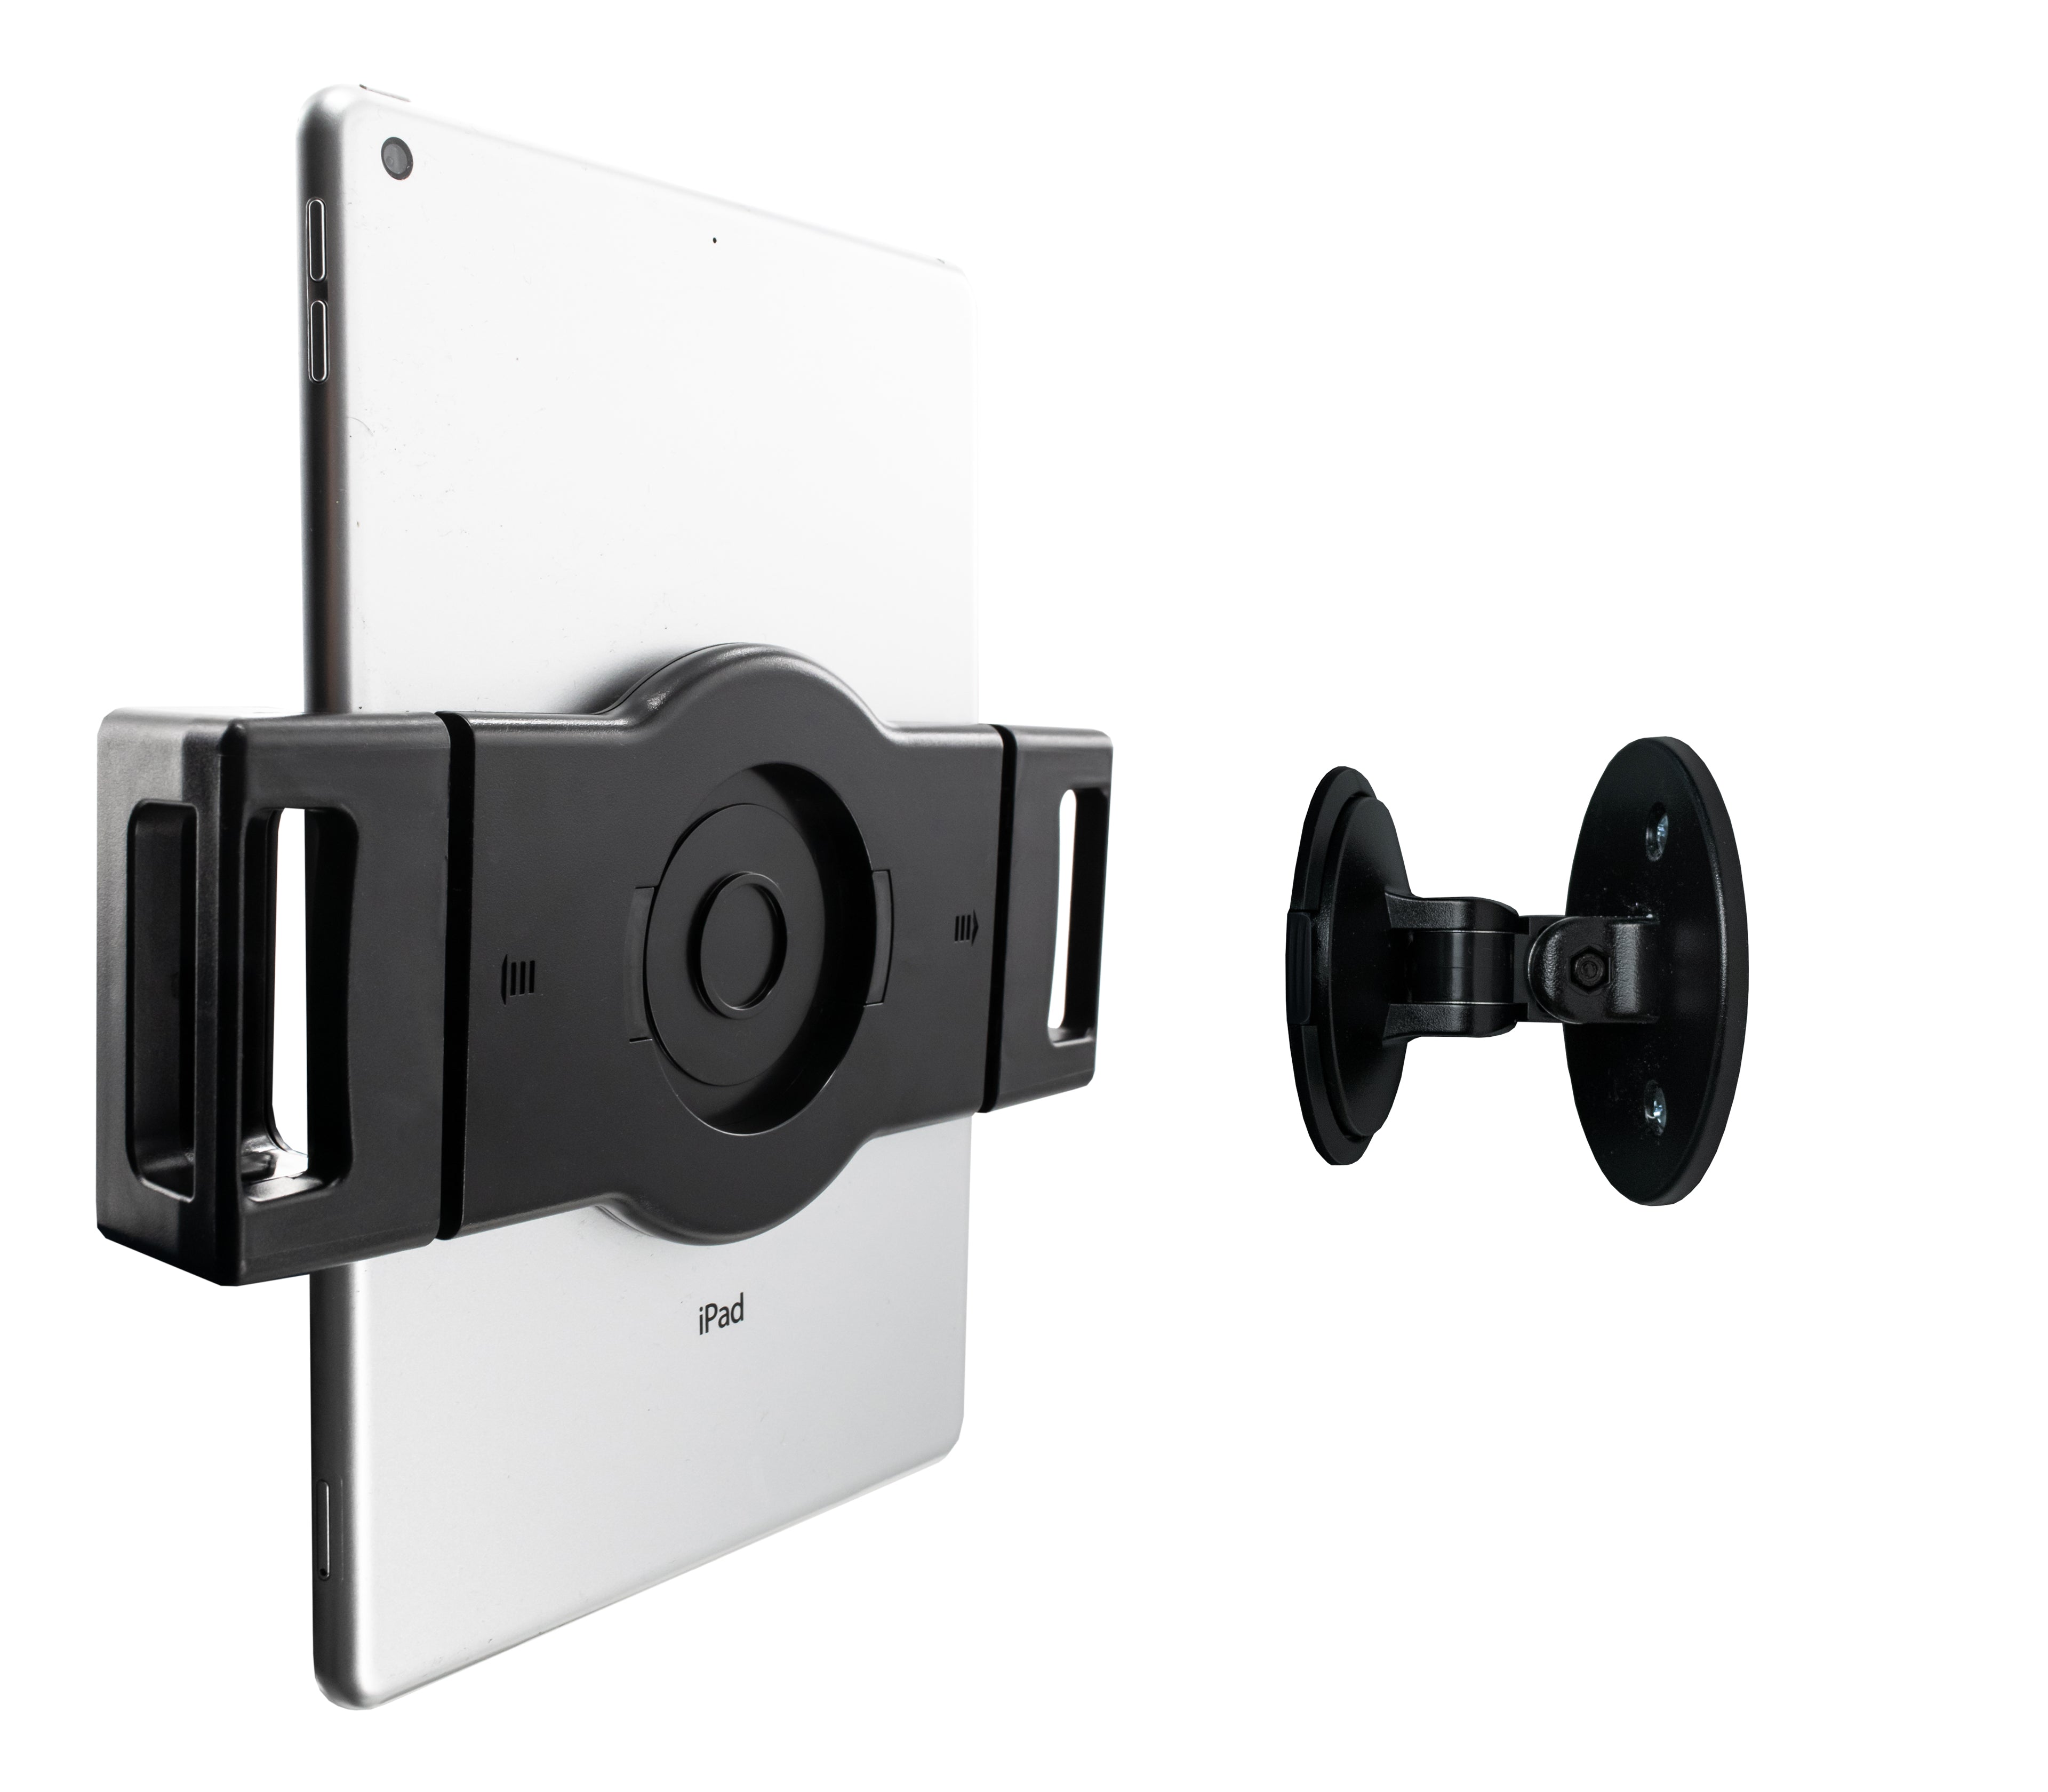 Quick-Connect Wall and Desk Mounting Kit for Tablets